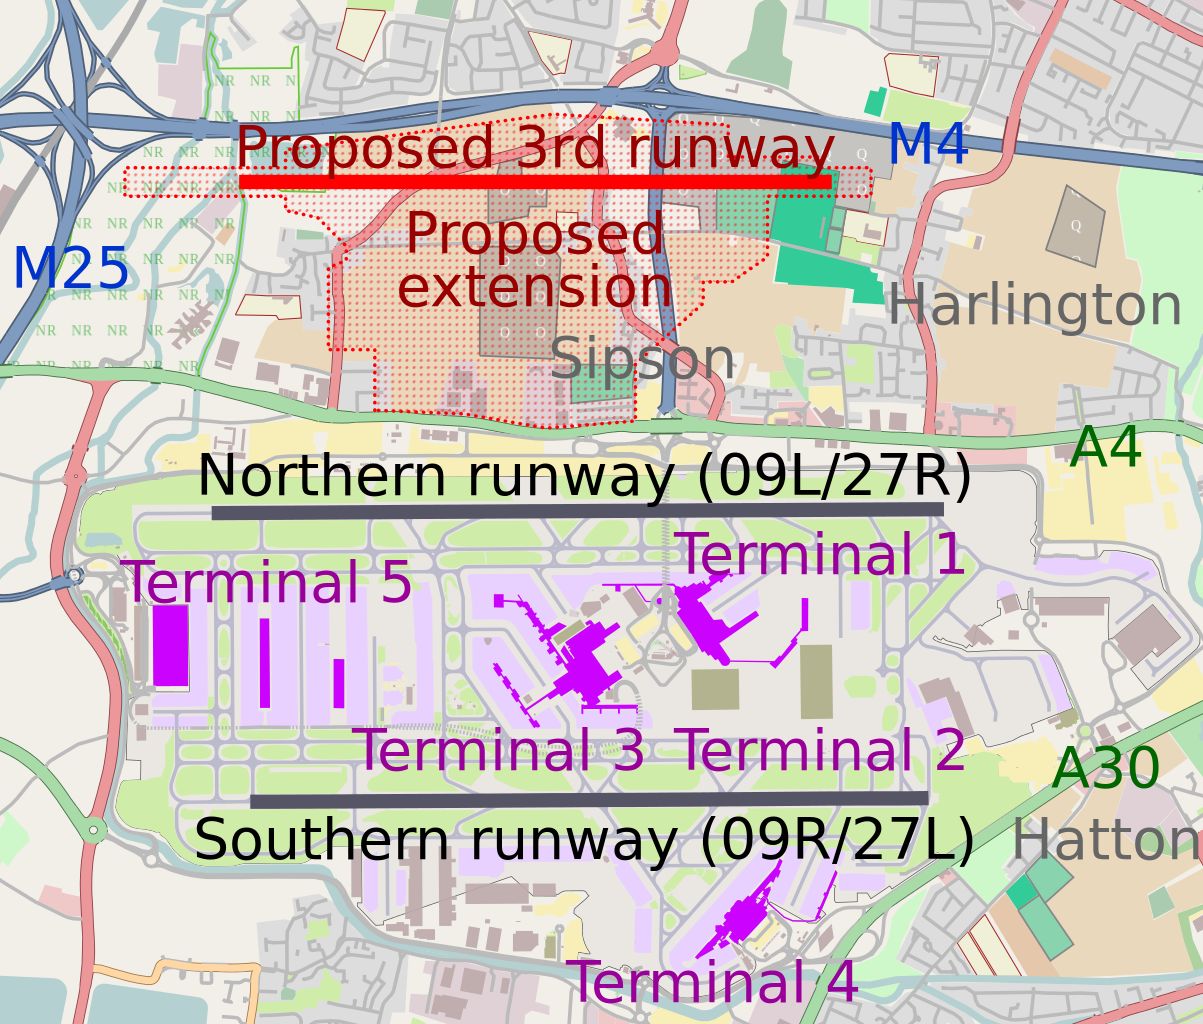 The proposed new third runway at London Heathrow Airport